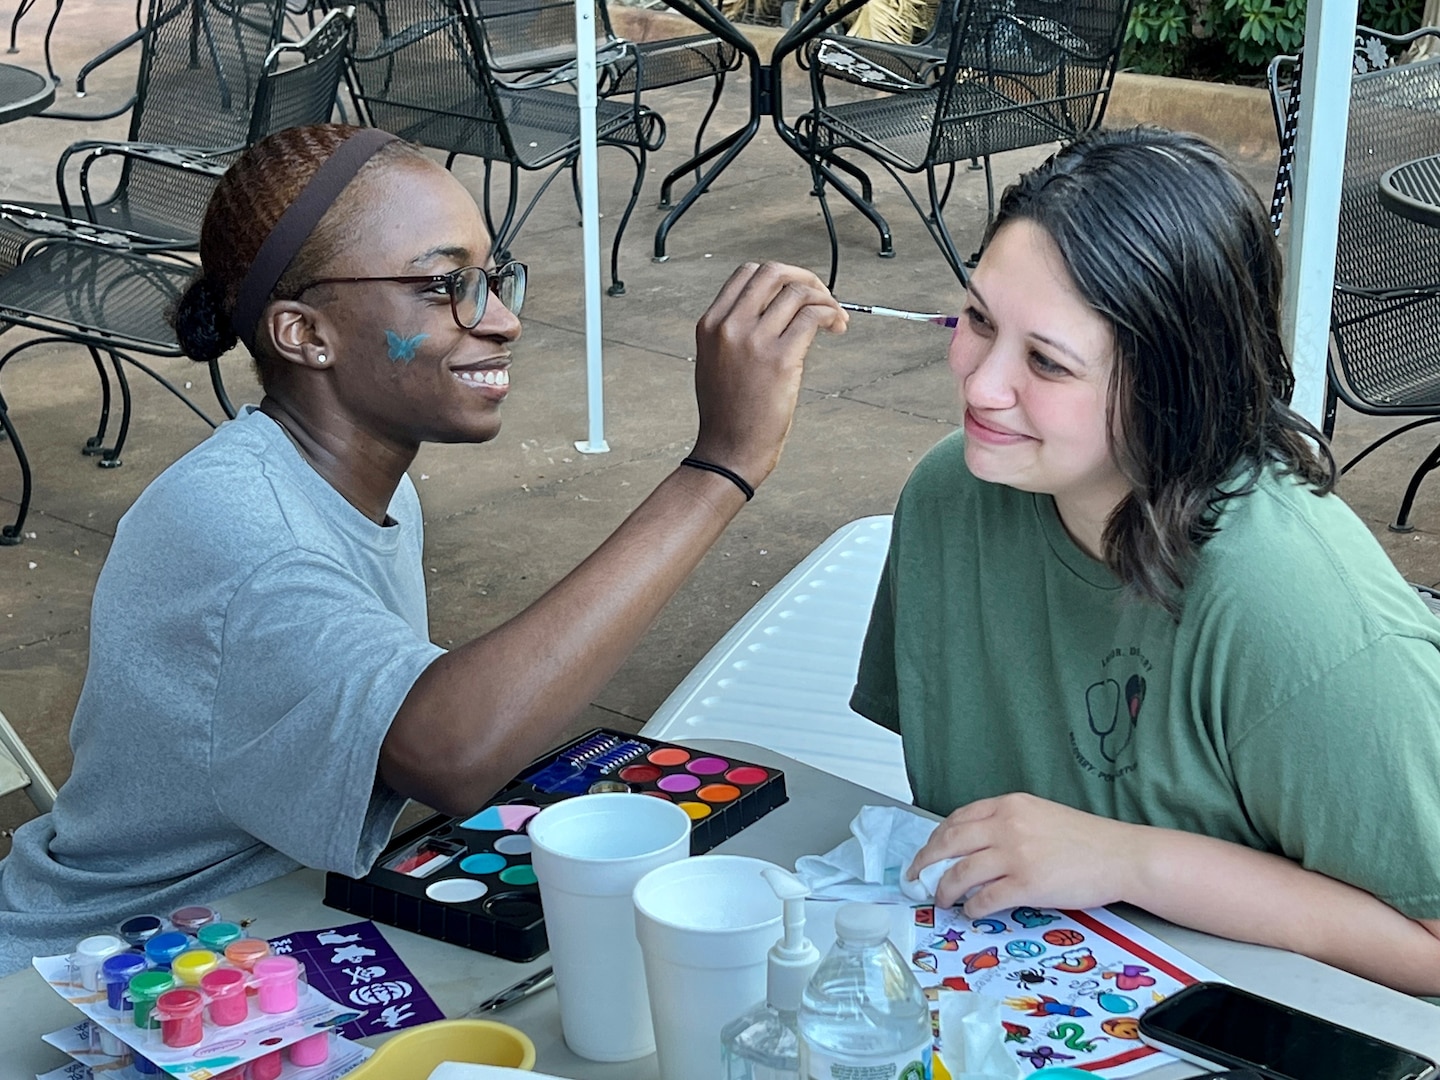 Woman getting her face painted by another woman.